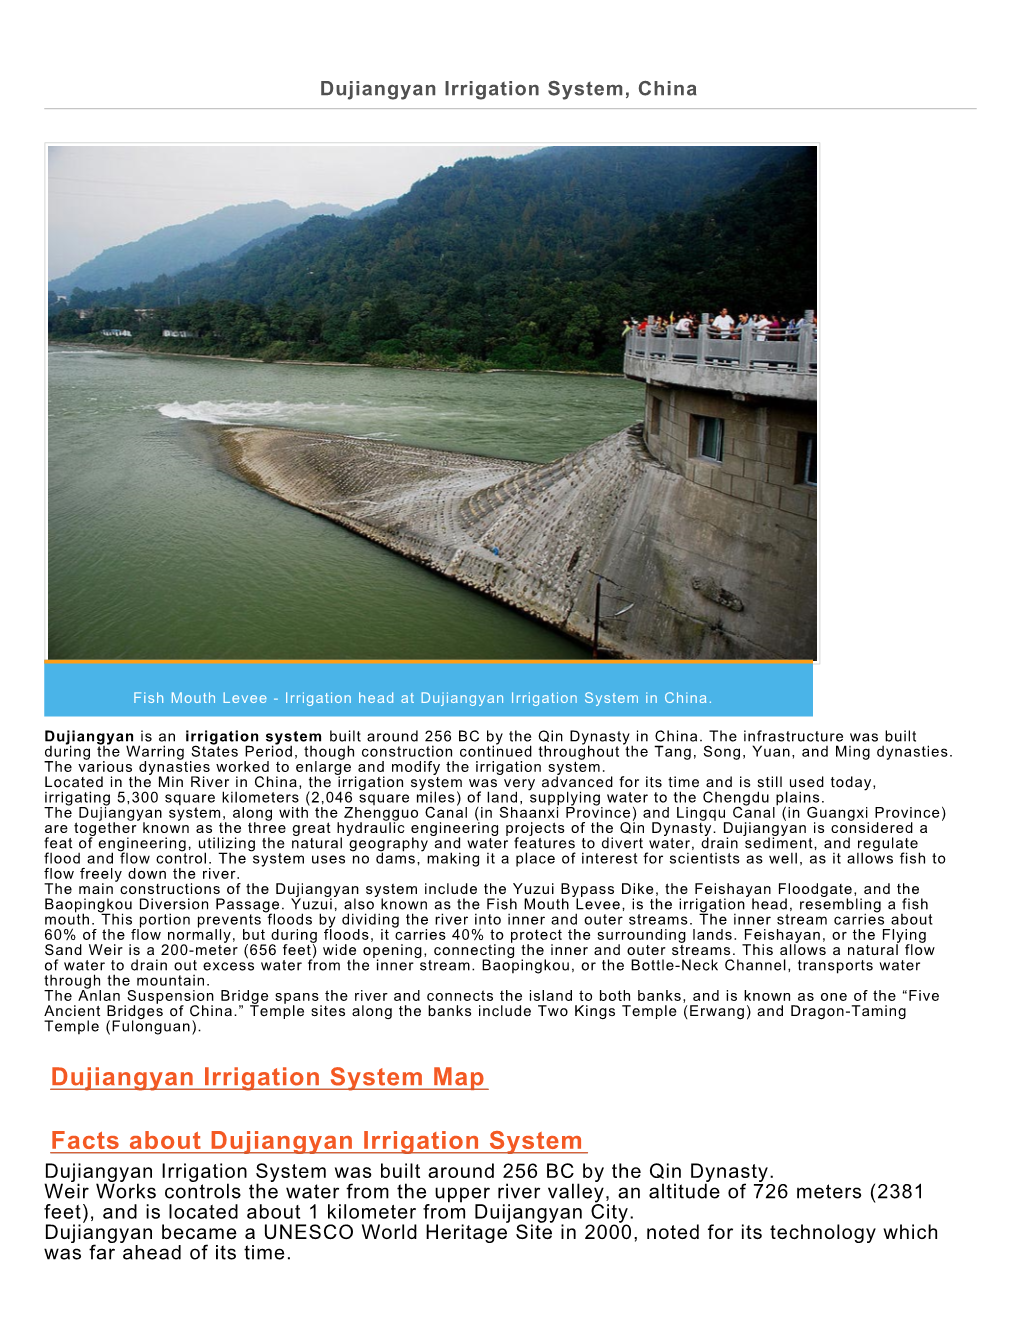 Where Is Dujiangyan Irrigation System ? Dujiangyan Irrigation System Is Located in the Min River, Which Is in the Sichuan Province of China